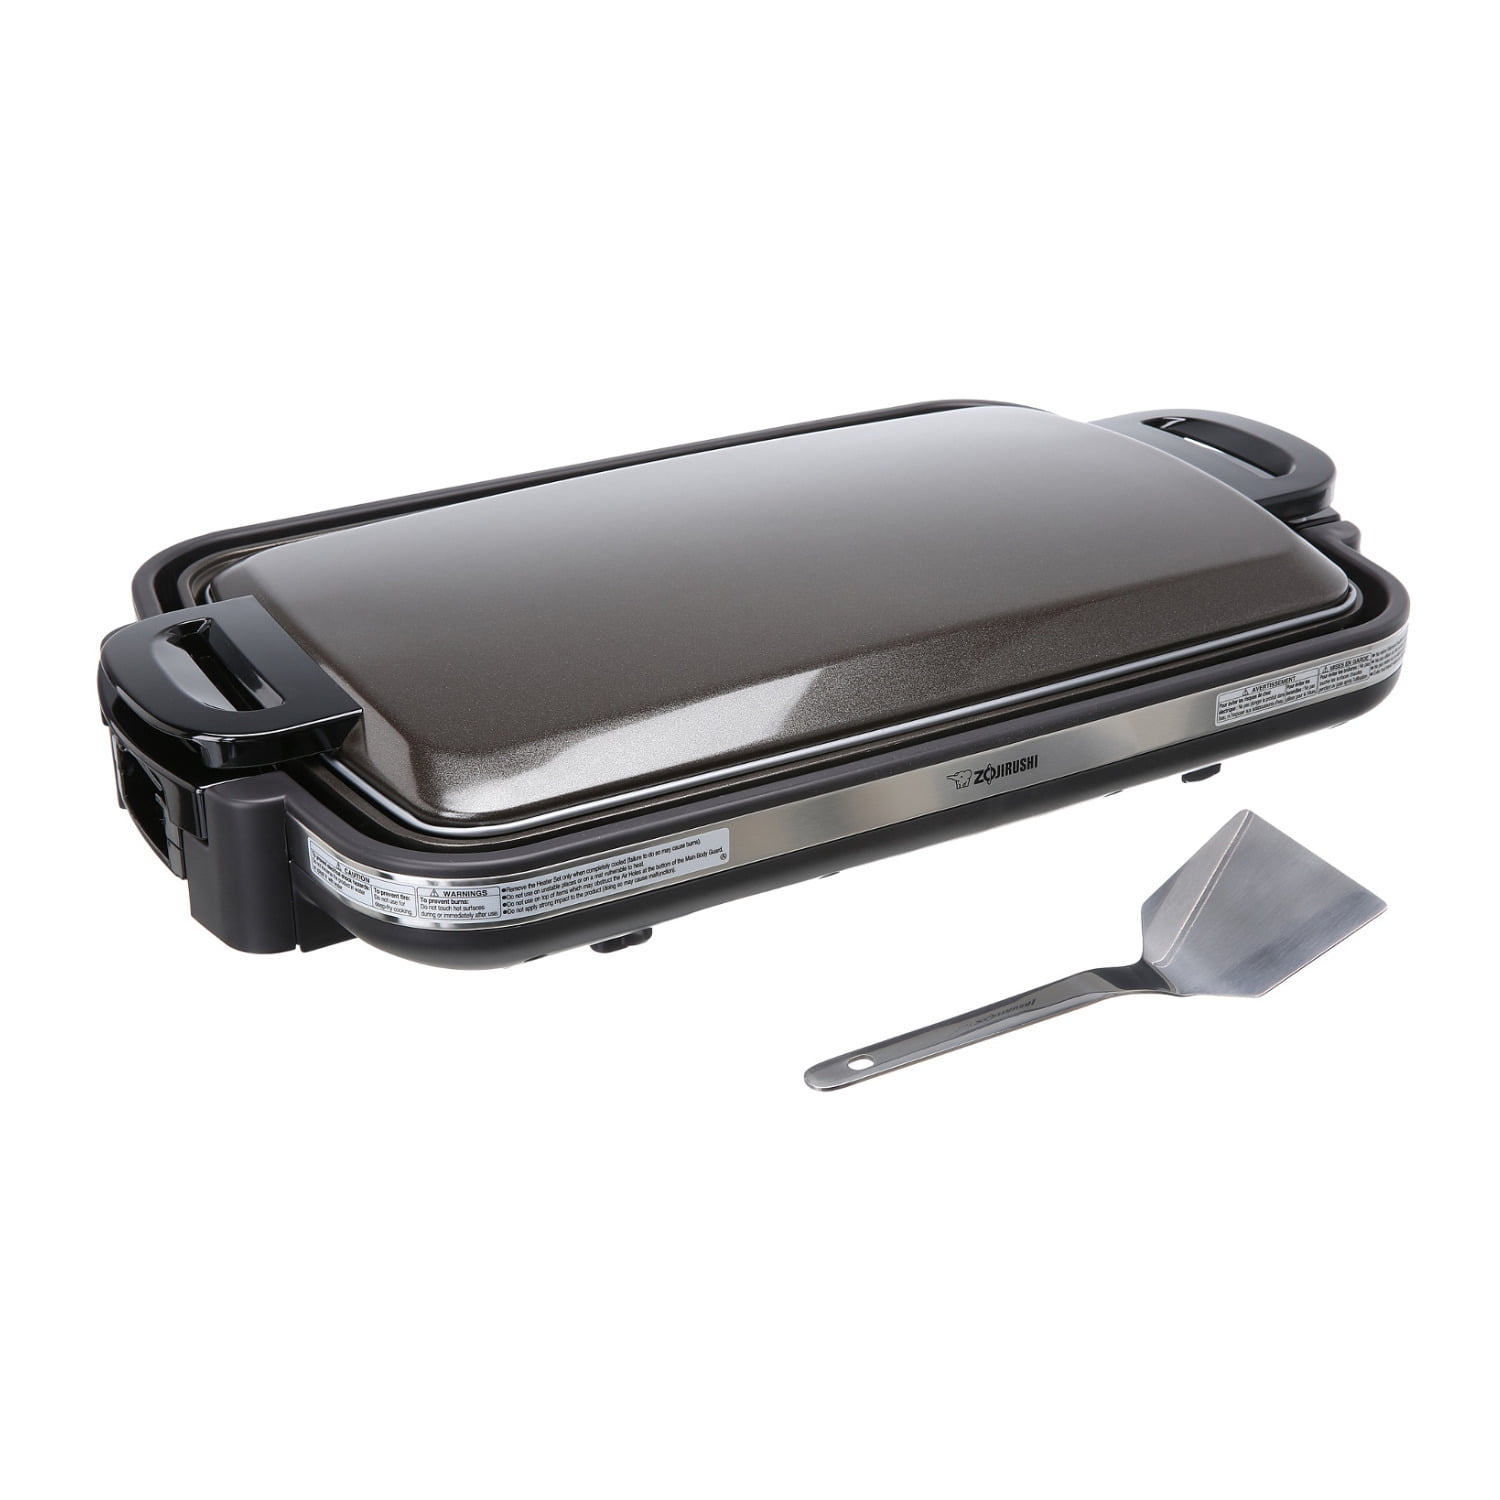  Zojirushi EA-DCC10 Gourmet Sizzler Electric Griddle,Stainless  Brown Extra Large: Home & Kitchen